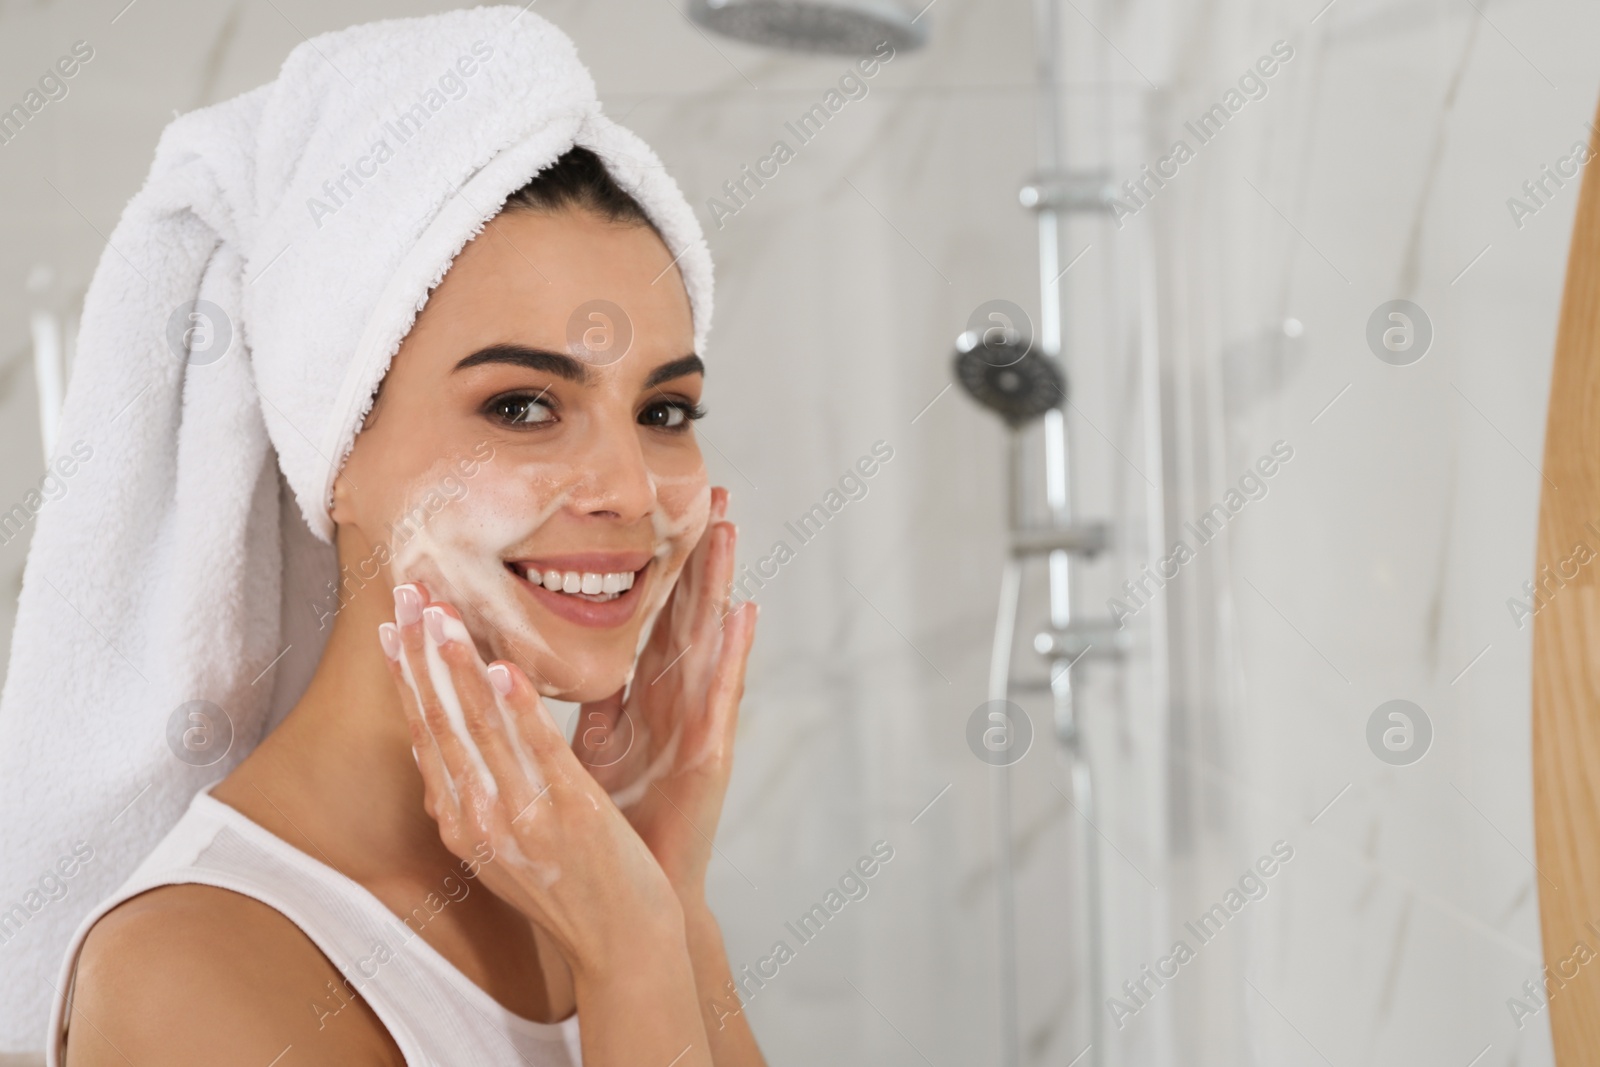 Photo of Happy young woman applying cleansing foam onto face in bathroom